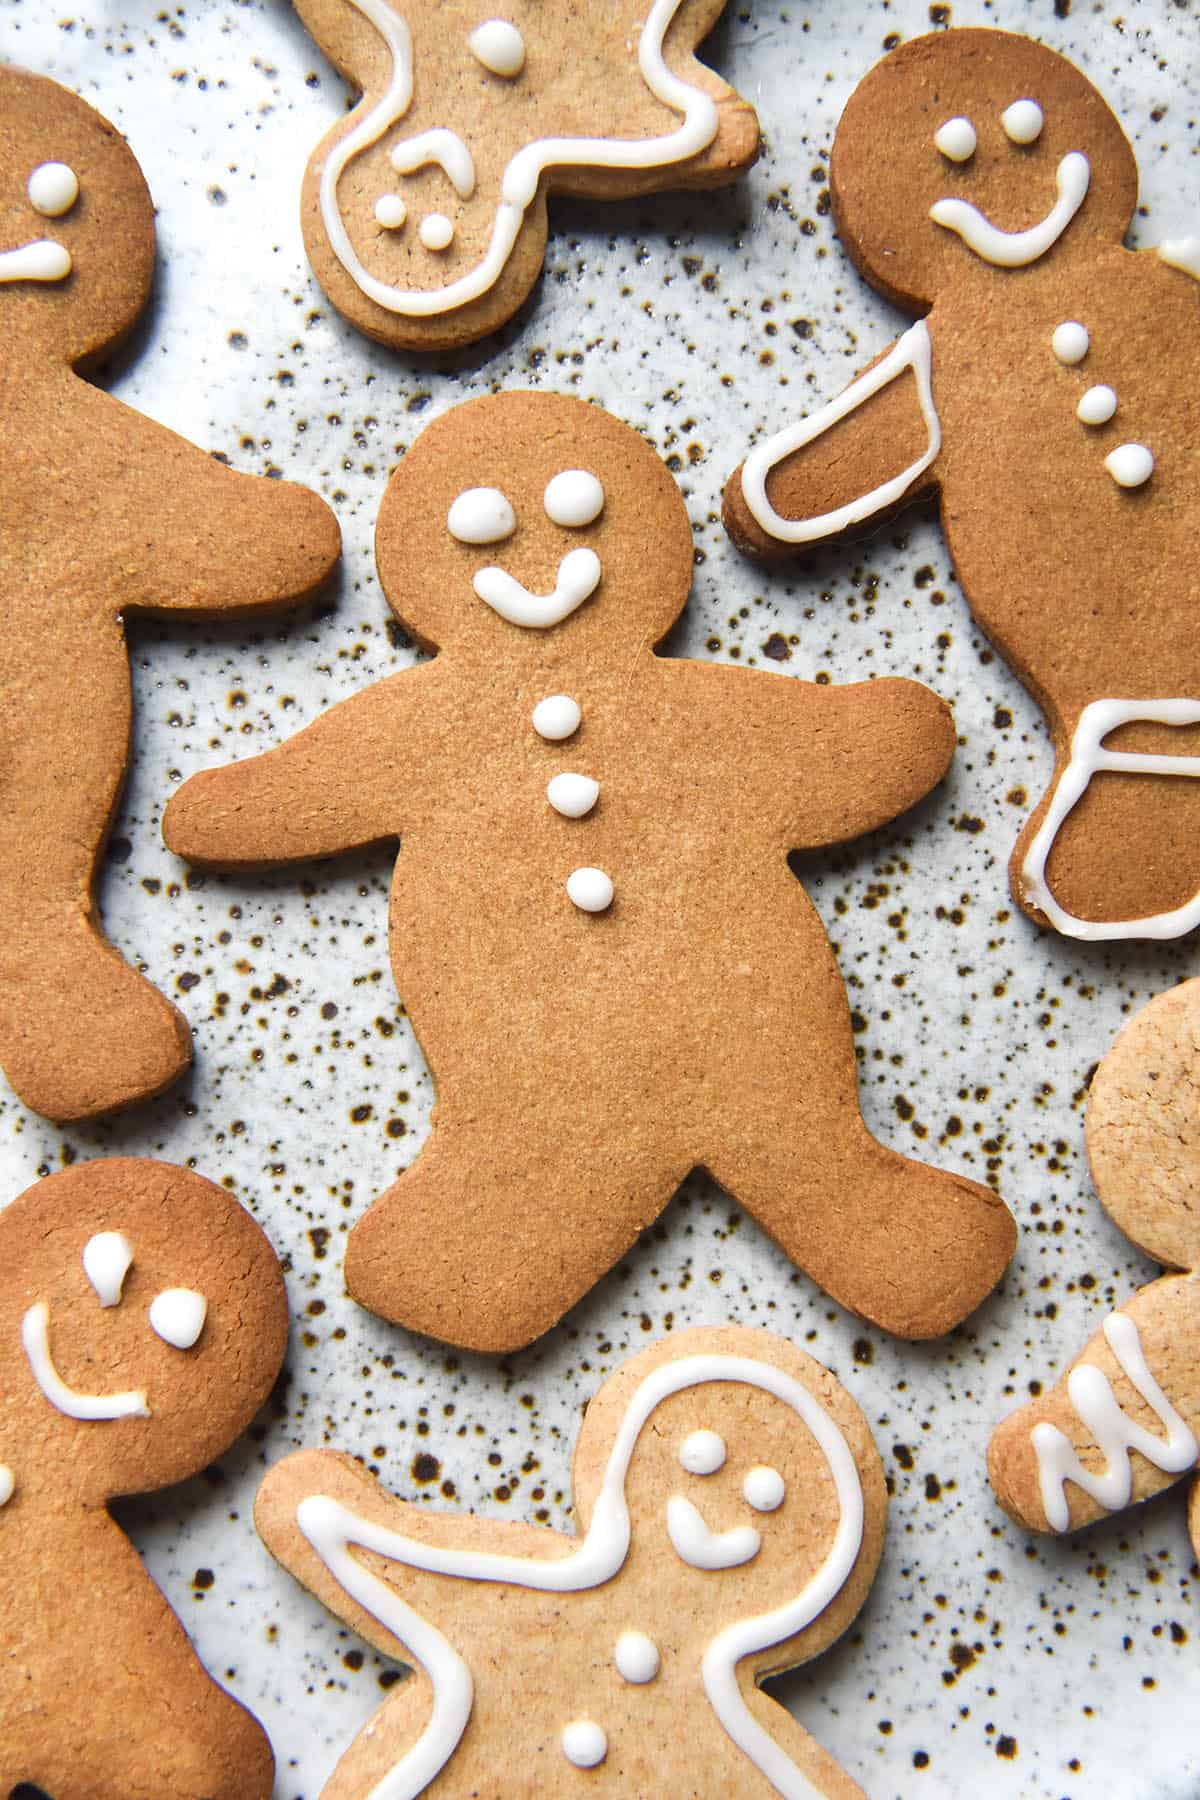 An aerial close up image of gluten free gingerbread people on a white speckled ceramic plate. The gingerbread are lightly decorated with white icing, giving them smiley faces and other small details